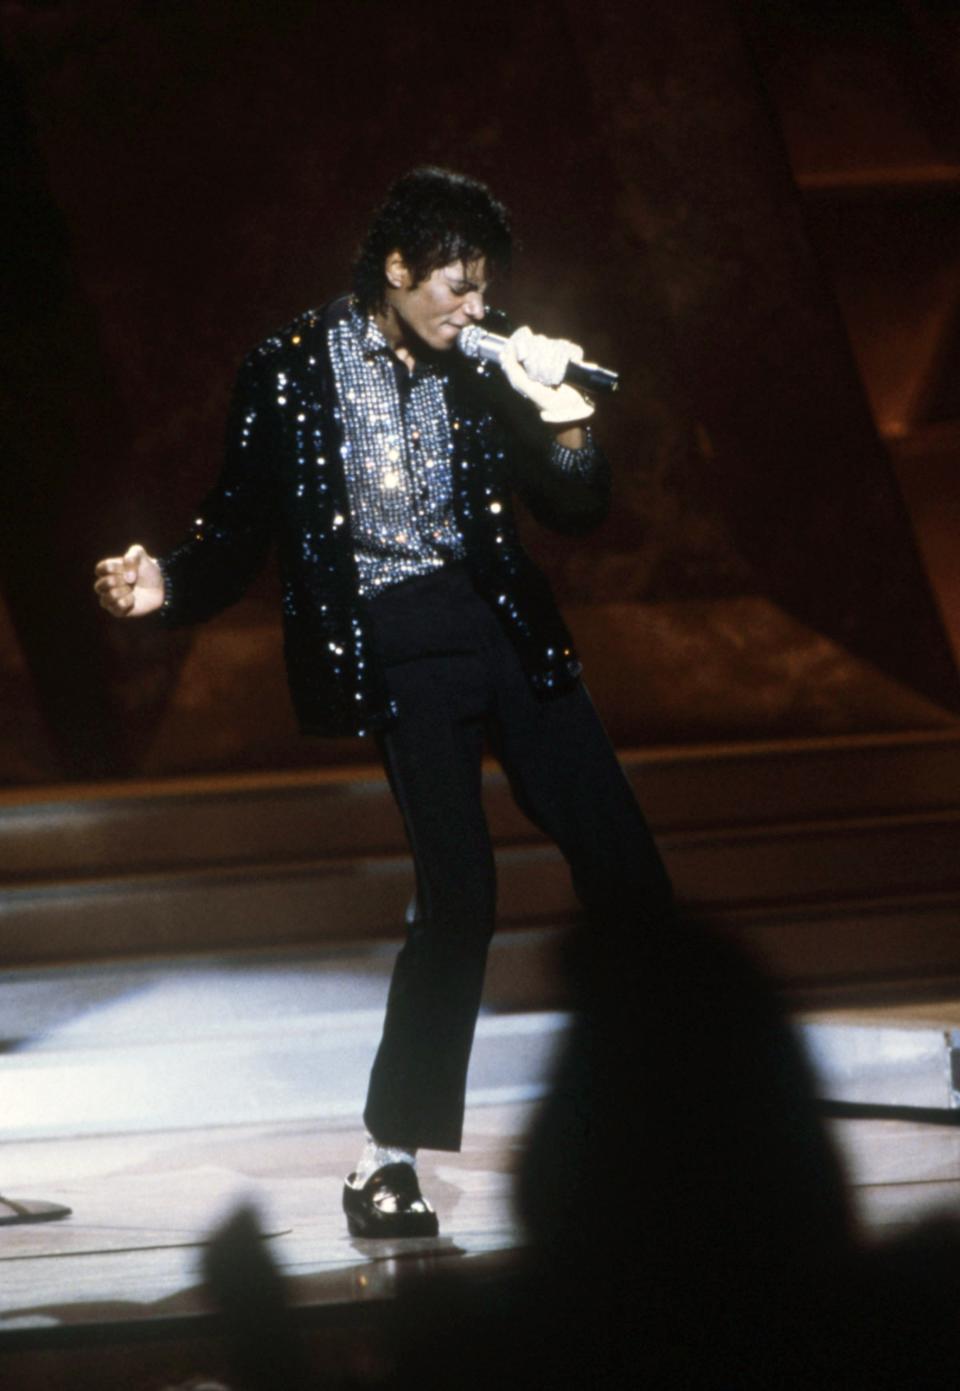 Michael Jackson performing “Billie Jean” on 1983’s ‘Motown 25’ special